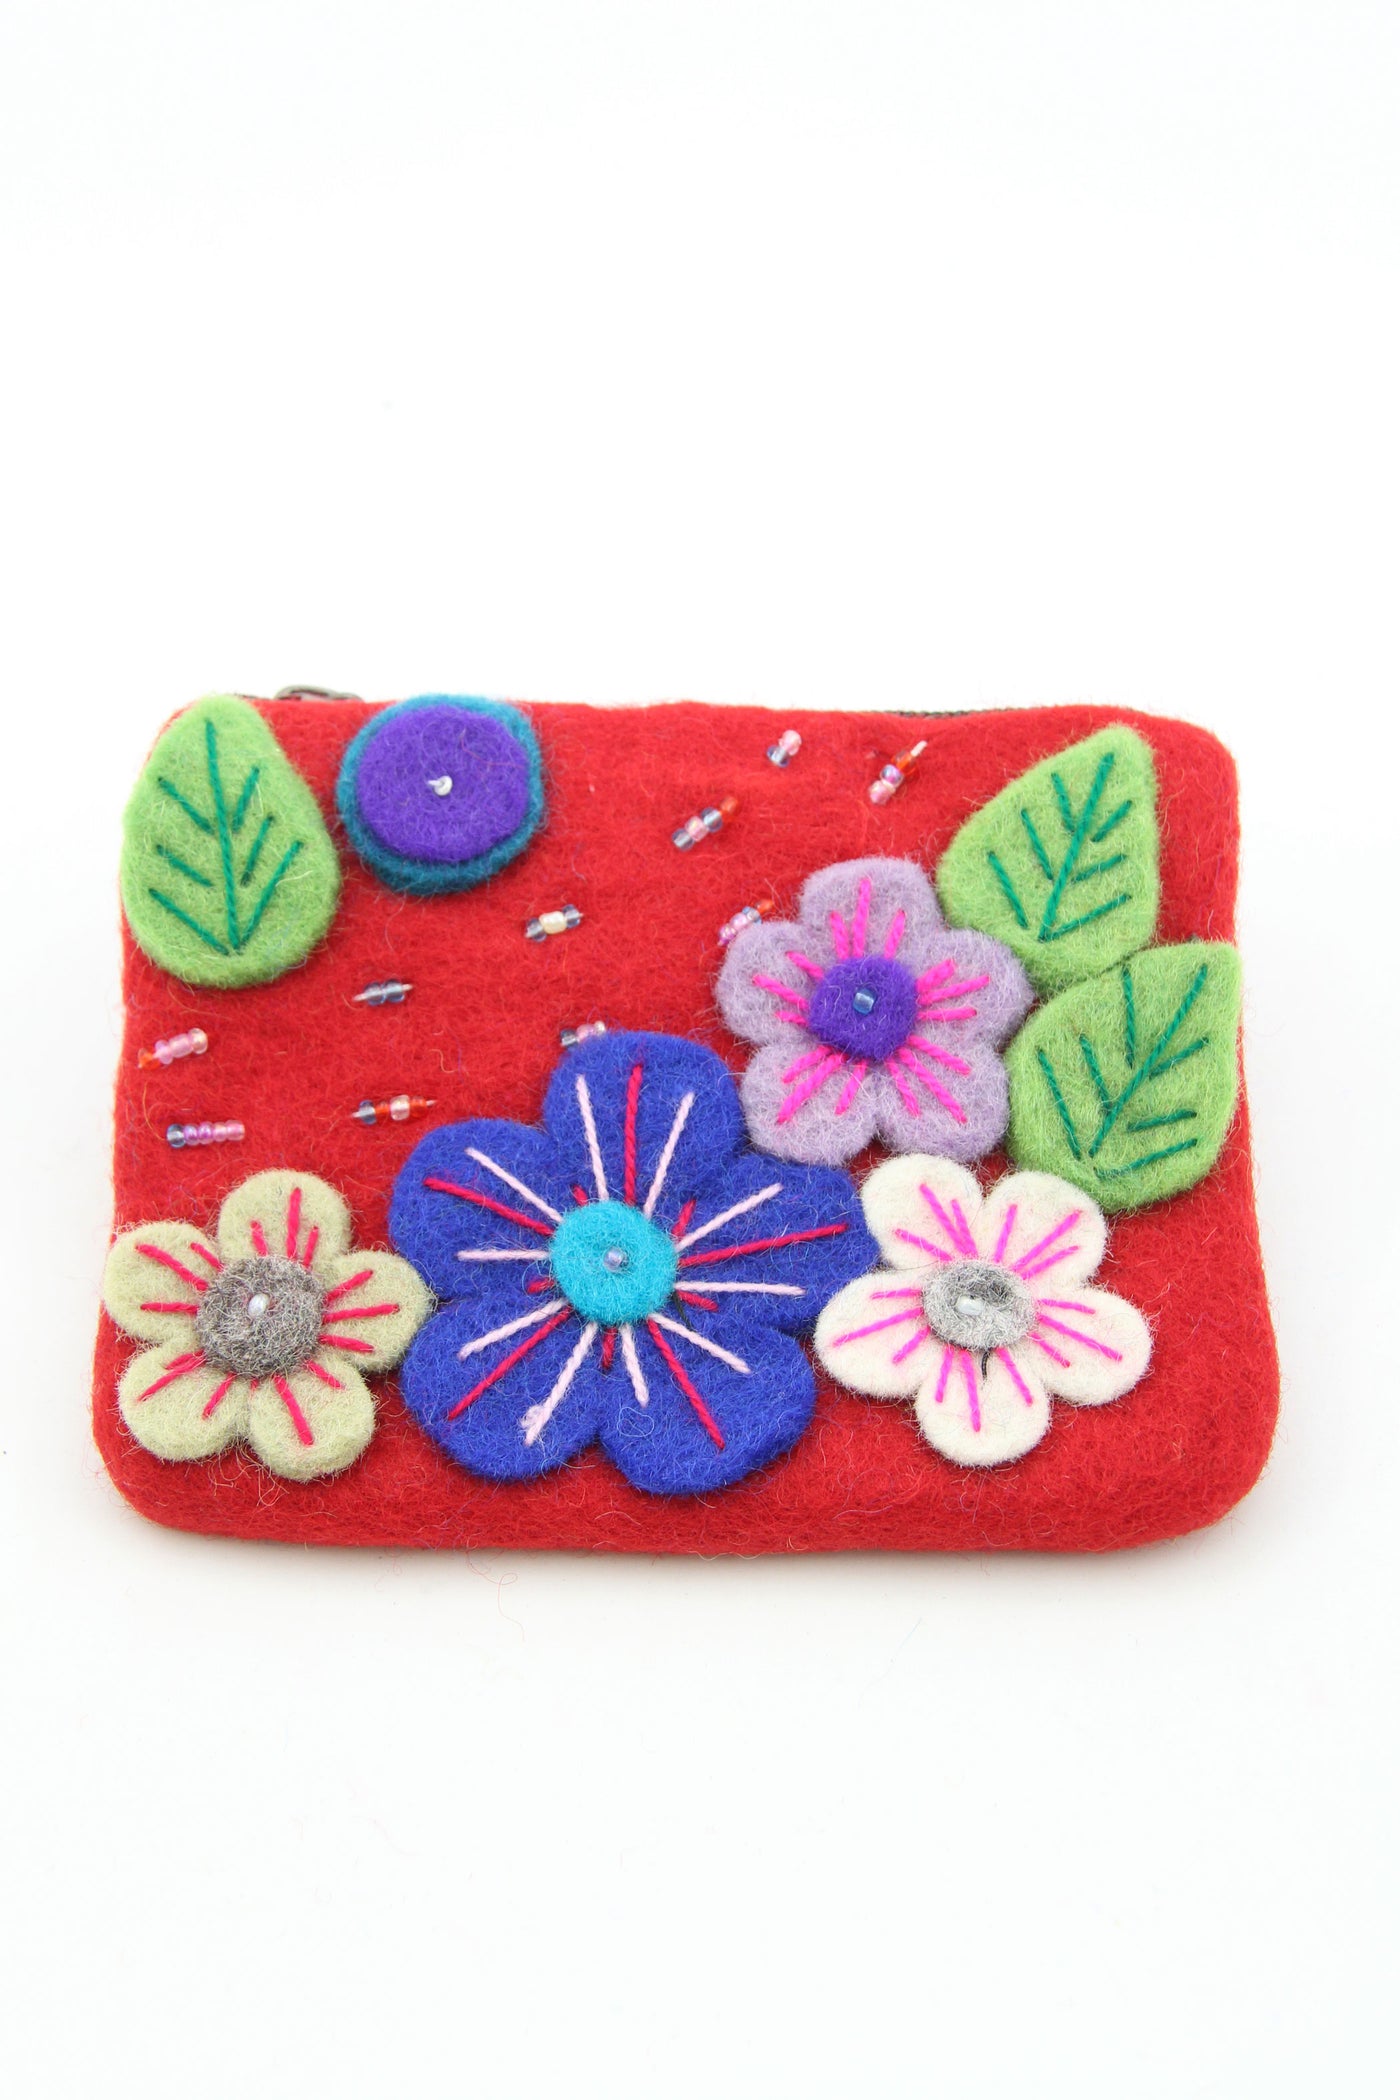 Red Floral Felted Wool Pouch, Coin Purse w/ Zipper, Fair Trade from Nepal